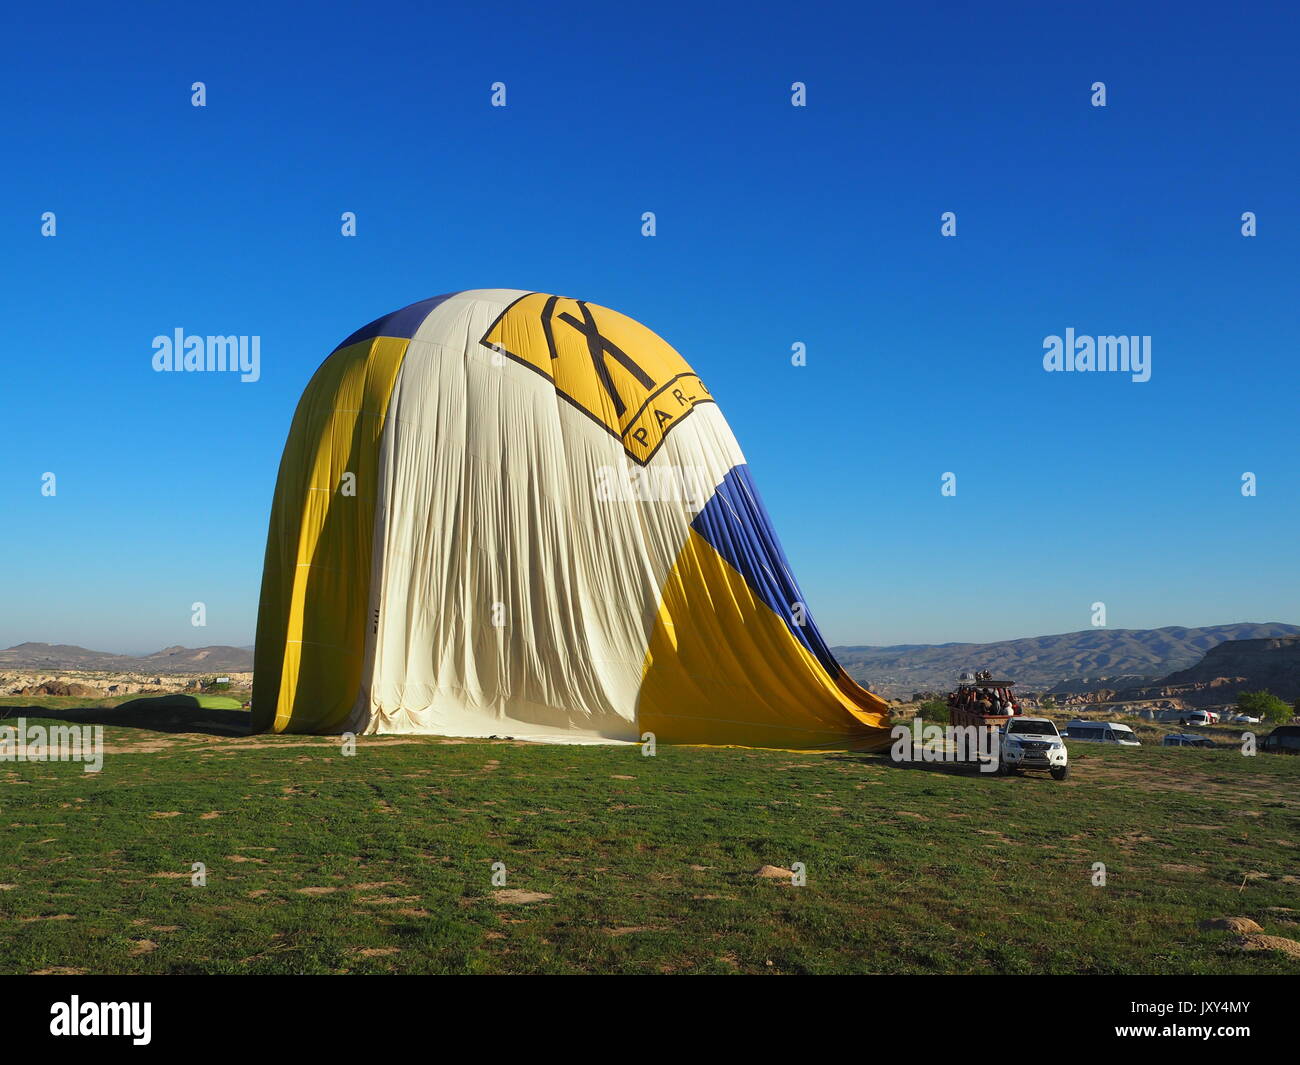 Hot air balloon landed safely on ground Stock Photo